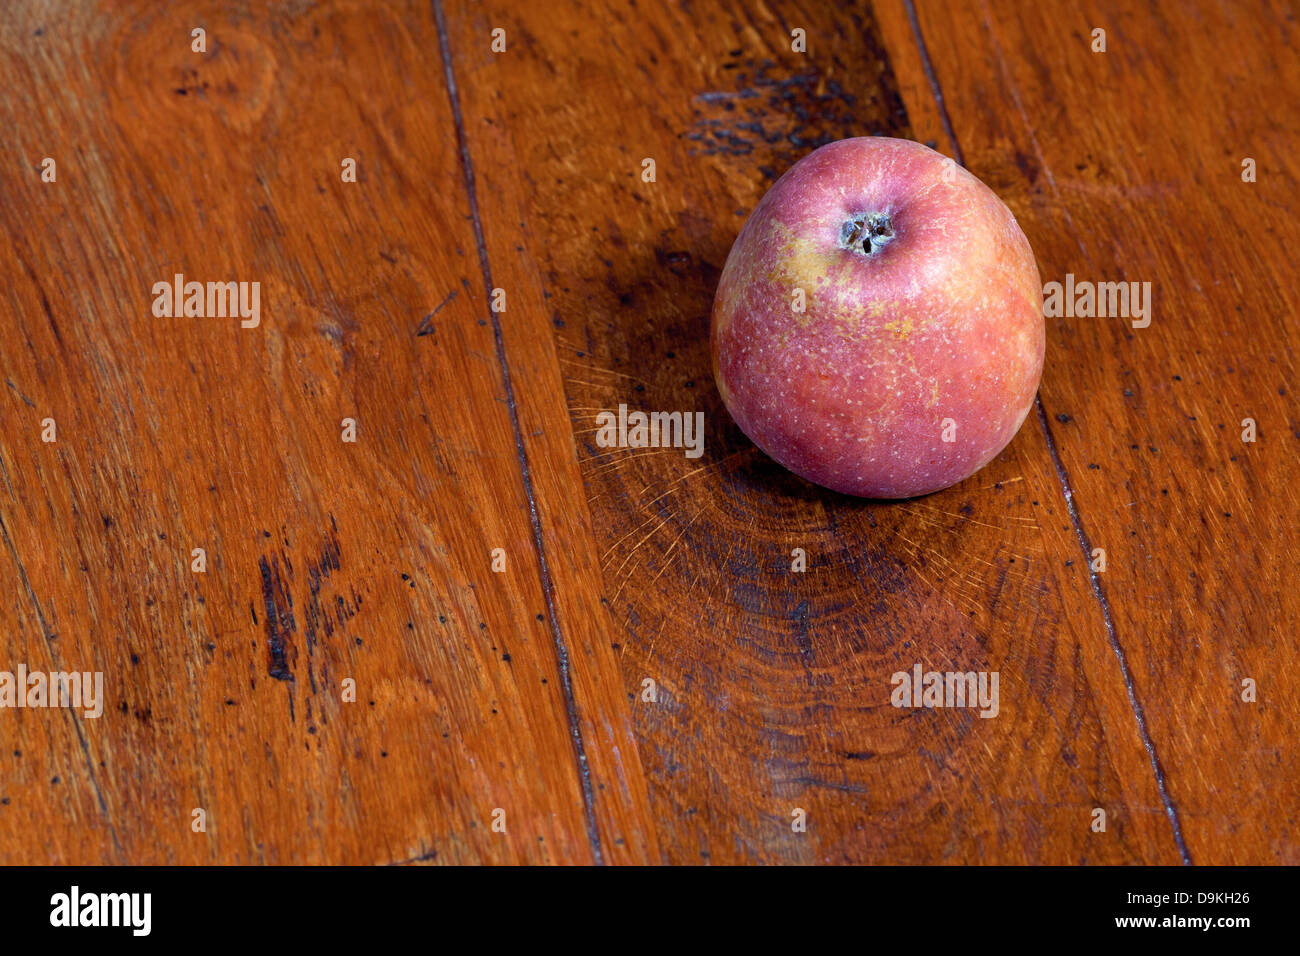 red apple on wooden table Stock Photo